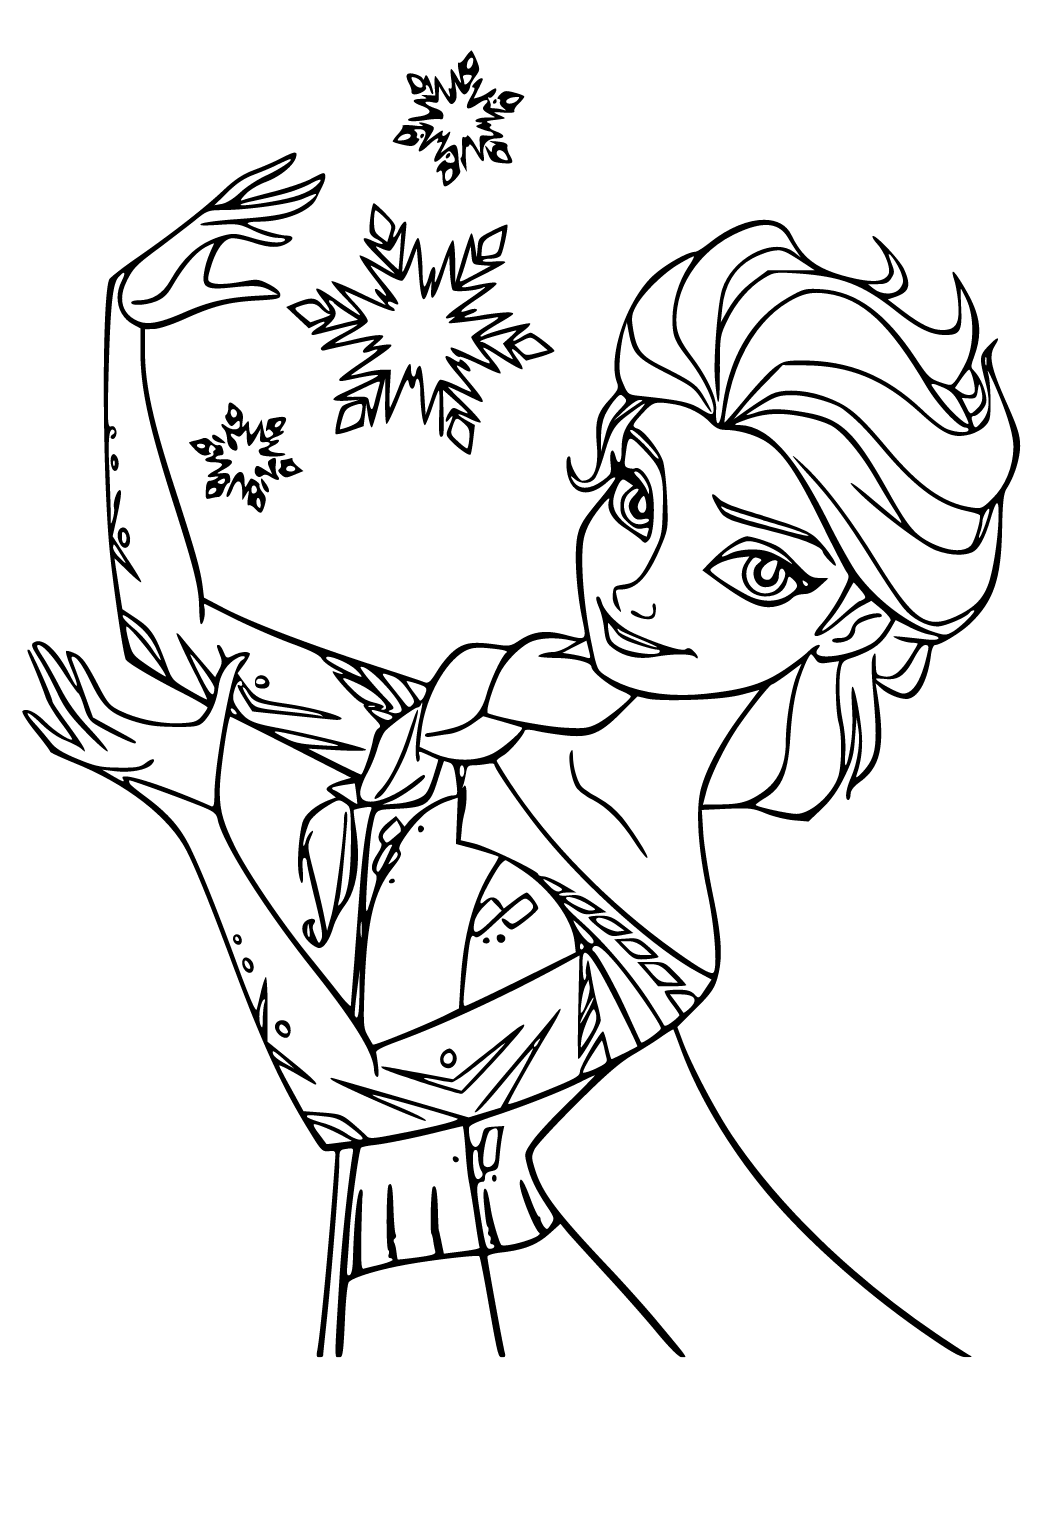 frozen-coloring-pages-for-preschoolers